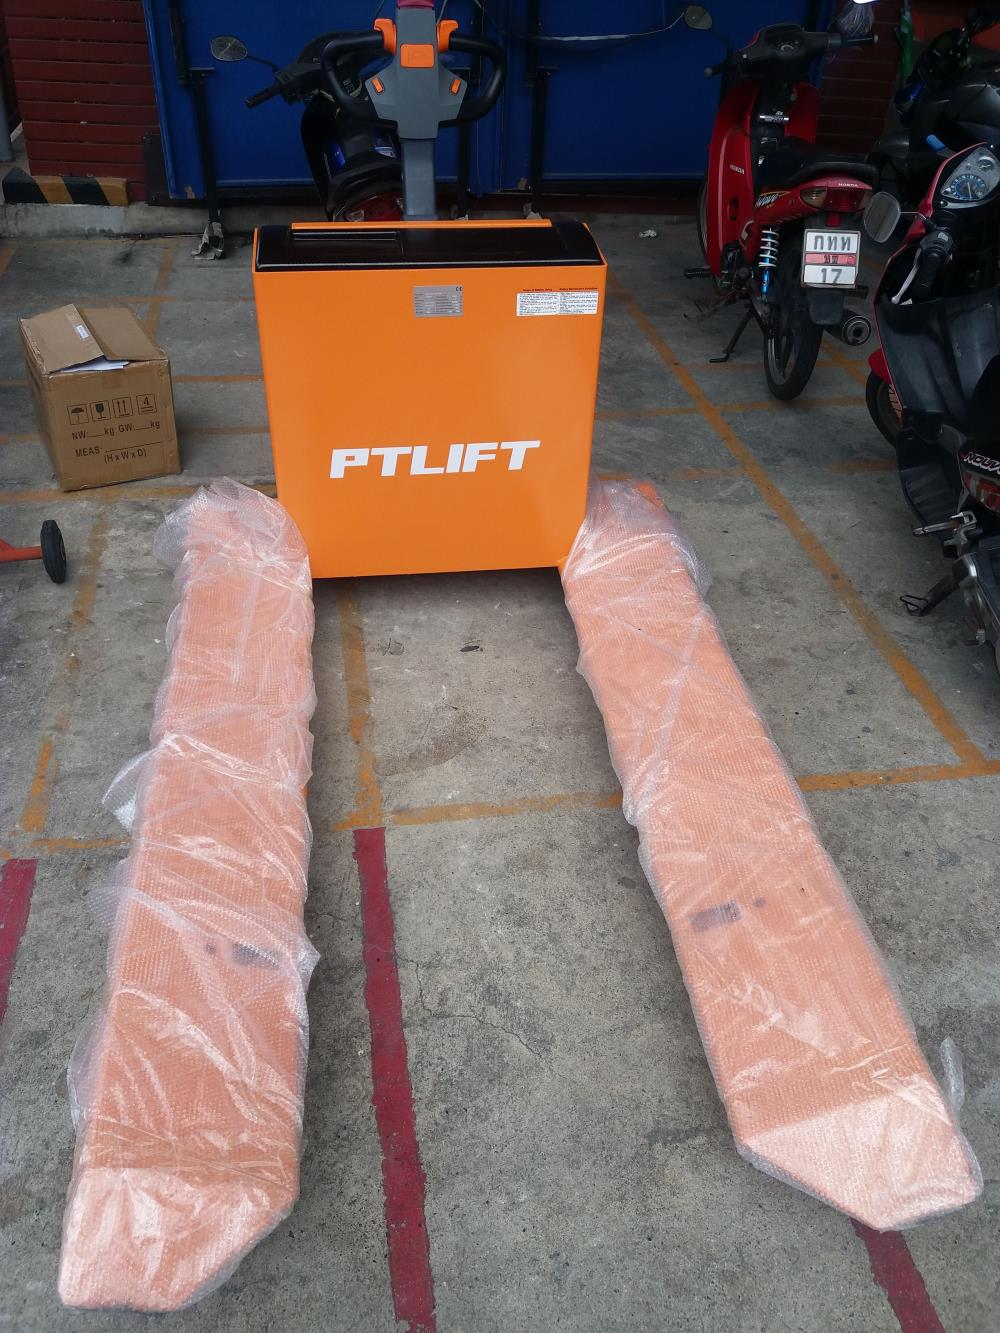 ELECTRIC PALLET ROLL TRUCK,รถยกม้วนกระดาษ ELECTRIC PALLET ROLL TRUCK,PT-LIFT,Tool and Tooling/Other Tools